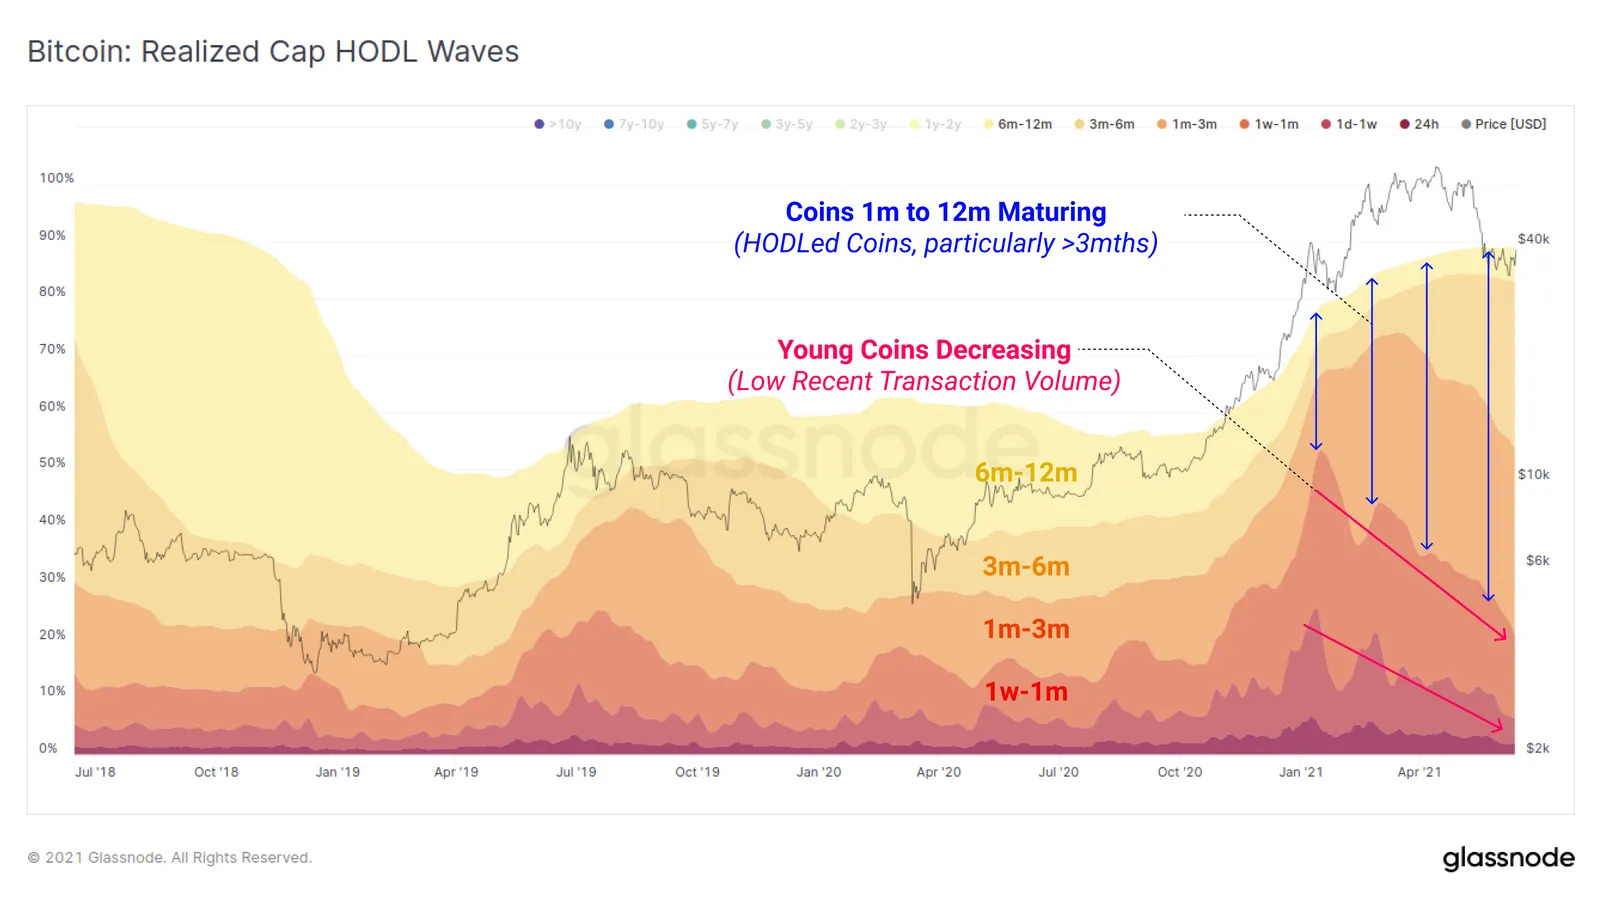 HODL: Crypto Investors Don't Sell Their Bitcoins